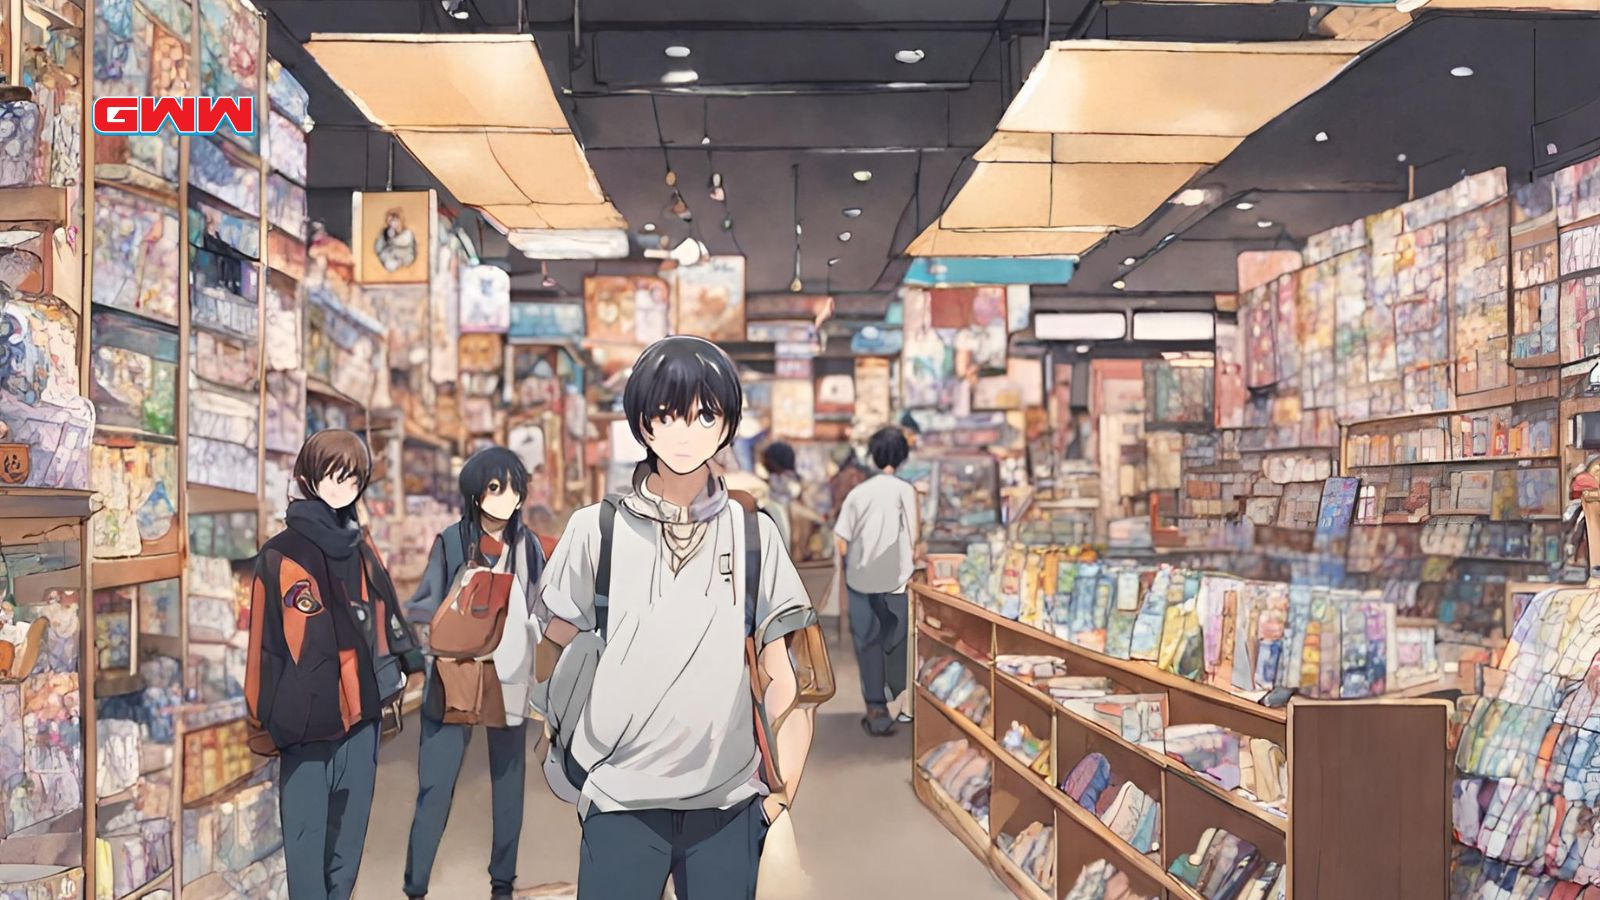 Shoppers walking through an anime store filled with colorful merchandise